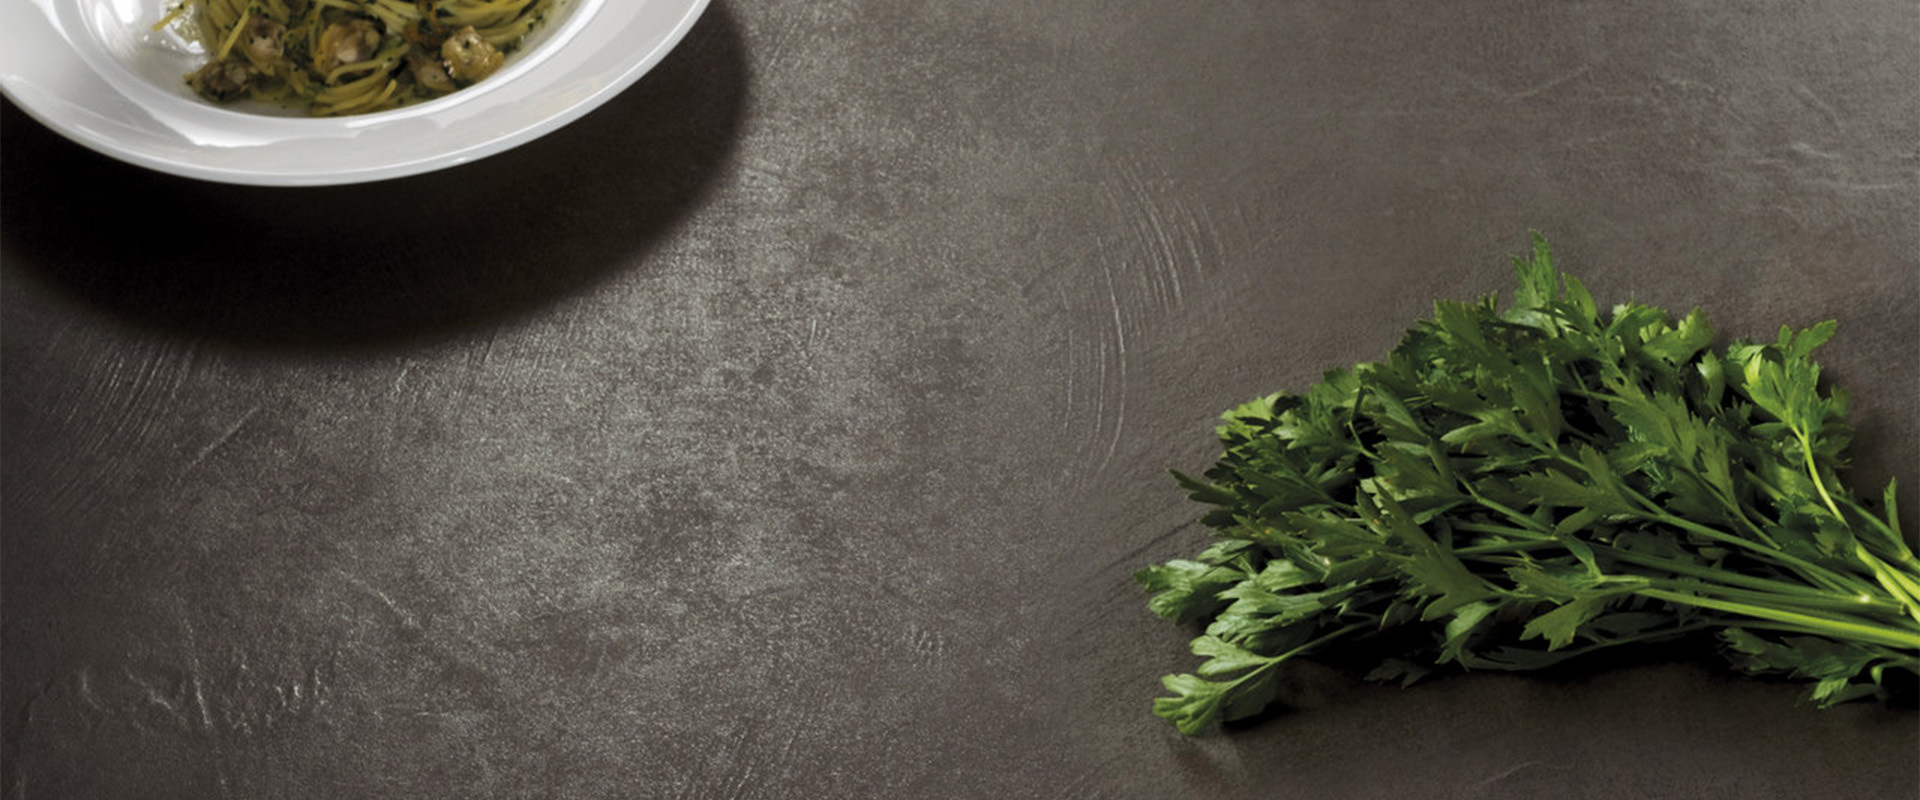 Concrete-effect kitchen tops: sustainable industrial style